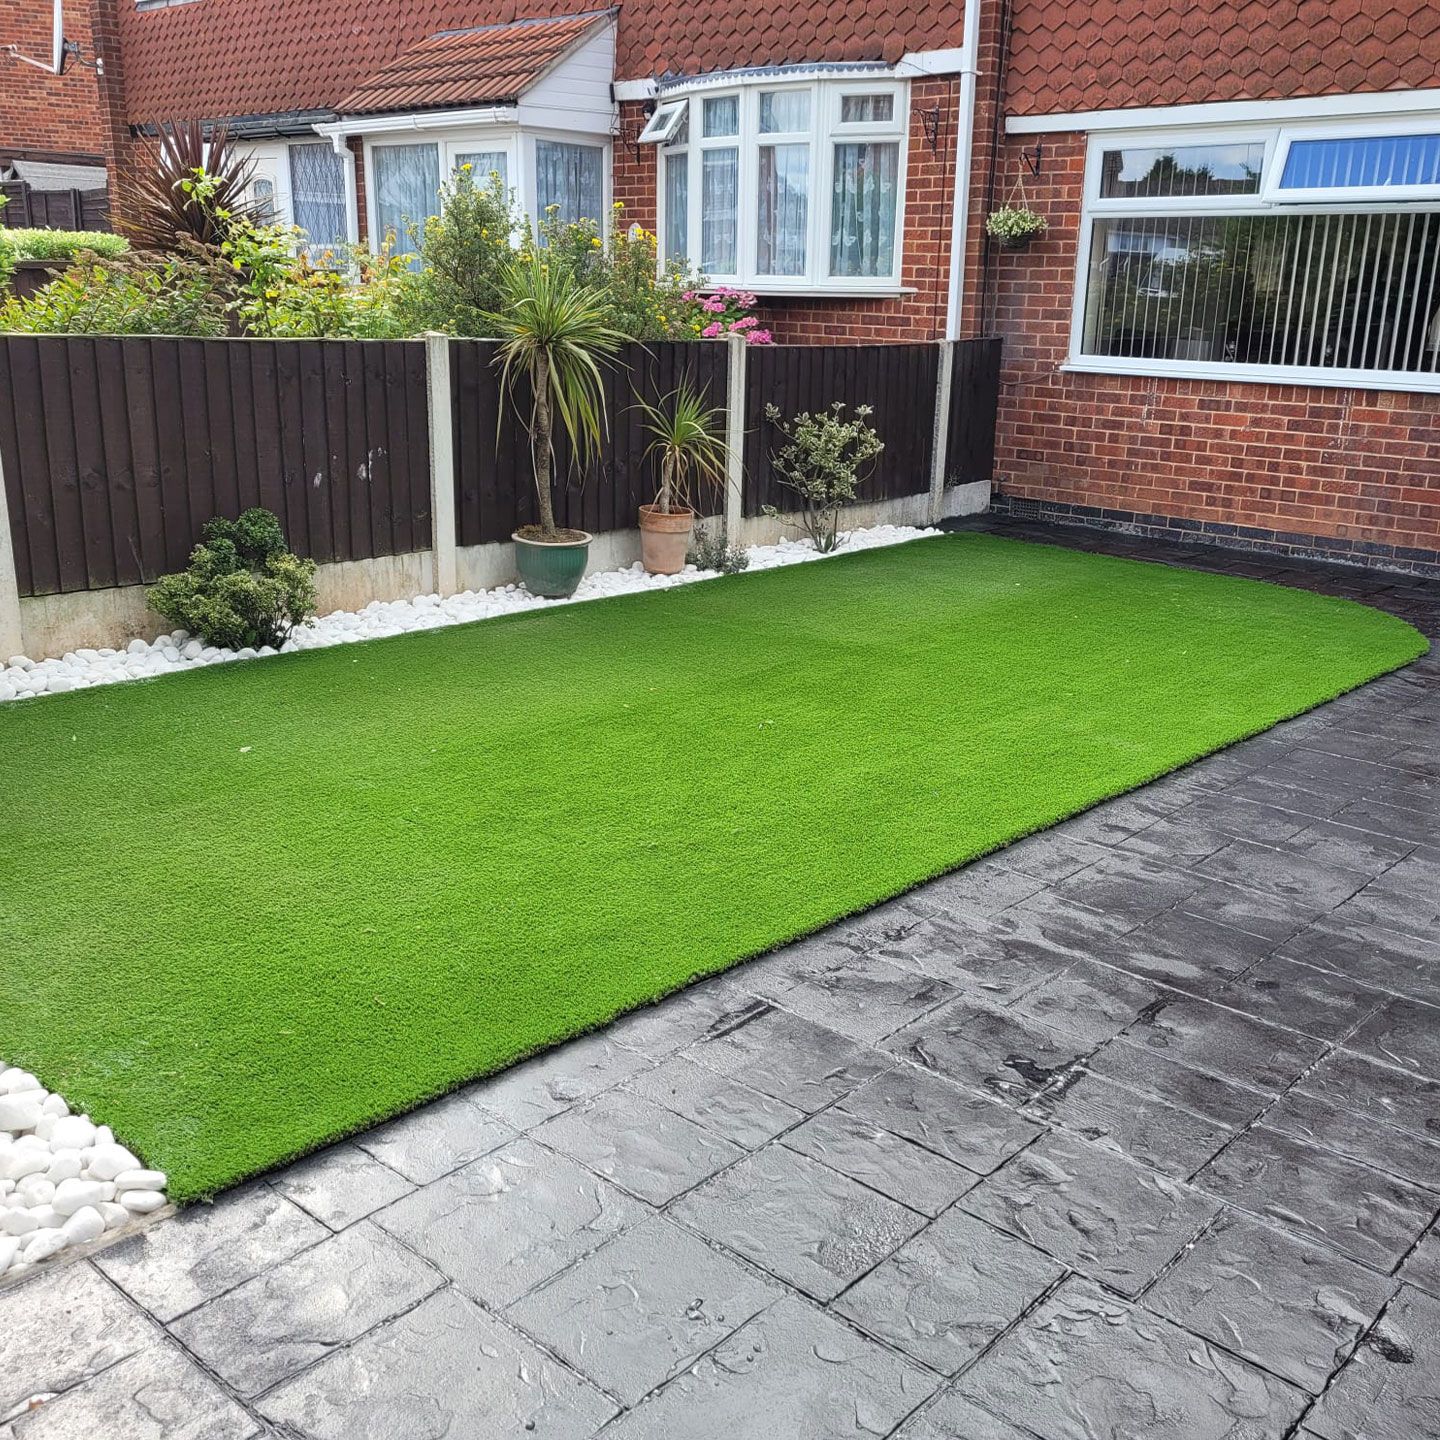 landscaping in Hinckley showing new artificial grass and patterned concrete paving